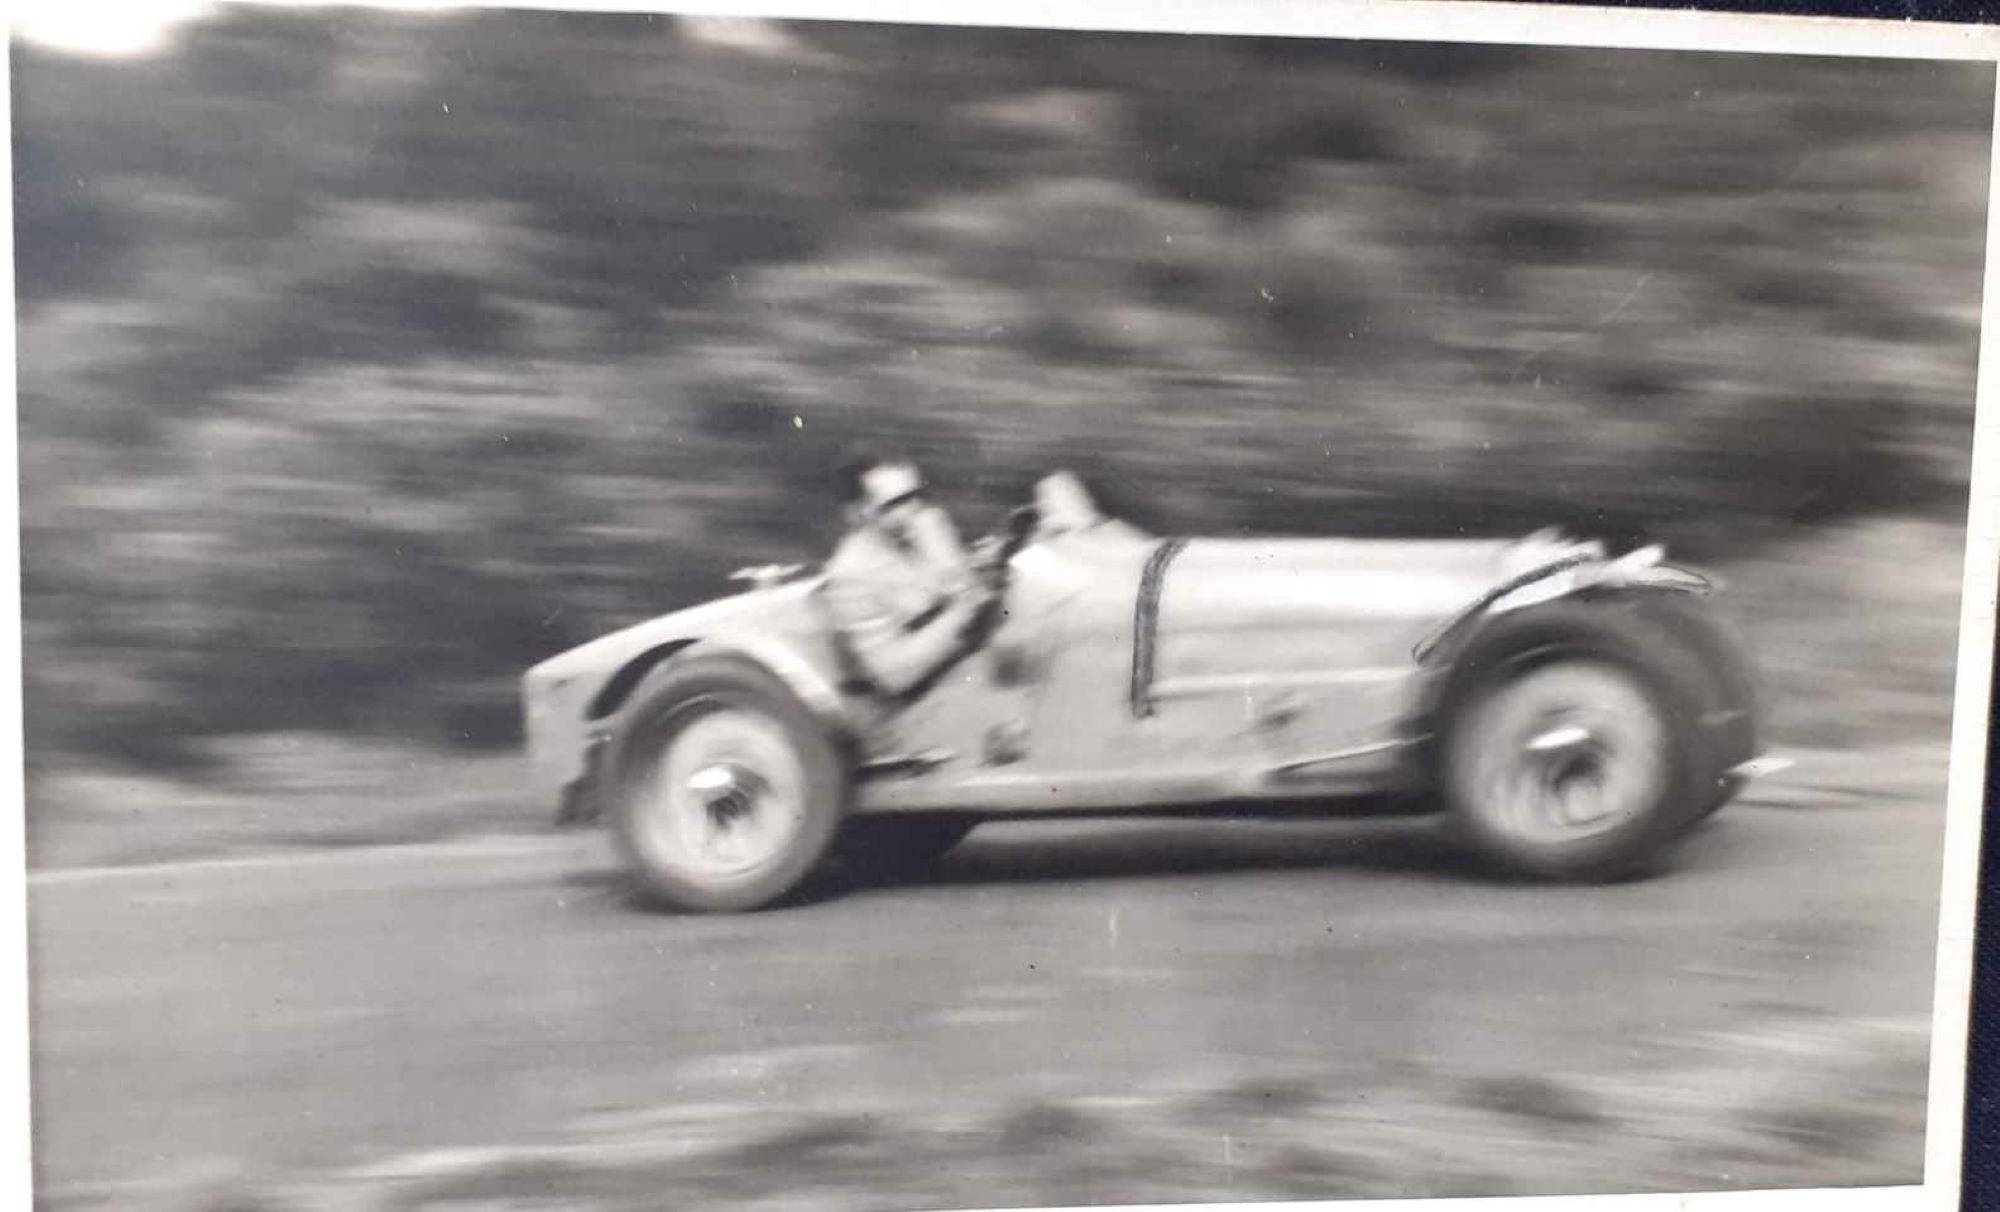 Name:  NSCC 1950 #0116 Bugatti T35 at speed - light colour 1950's - image Graeme Wells arch Anthony Wel.jpg
Views: 218
Size:  158.1 KB